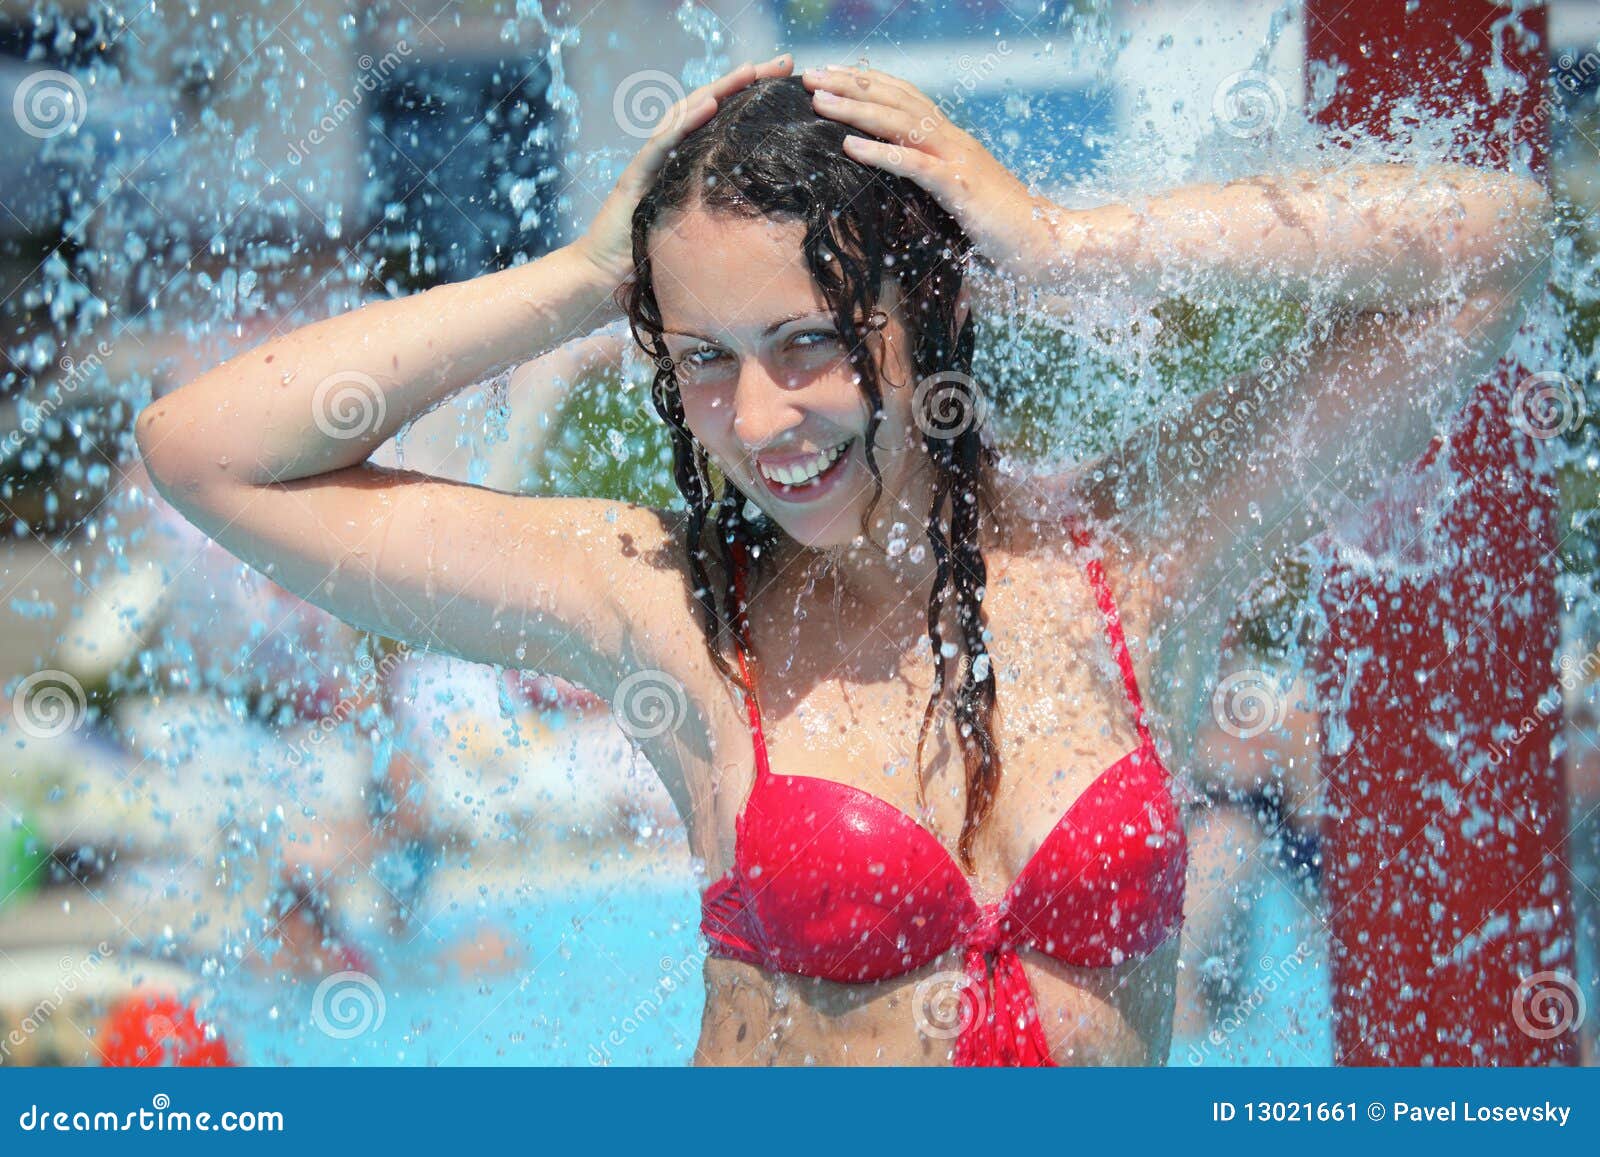 https://thumbs.dreamstime.com/z/smiling-woman-bathes-pool-under-water-splashes-13021661.jpg